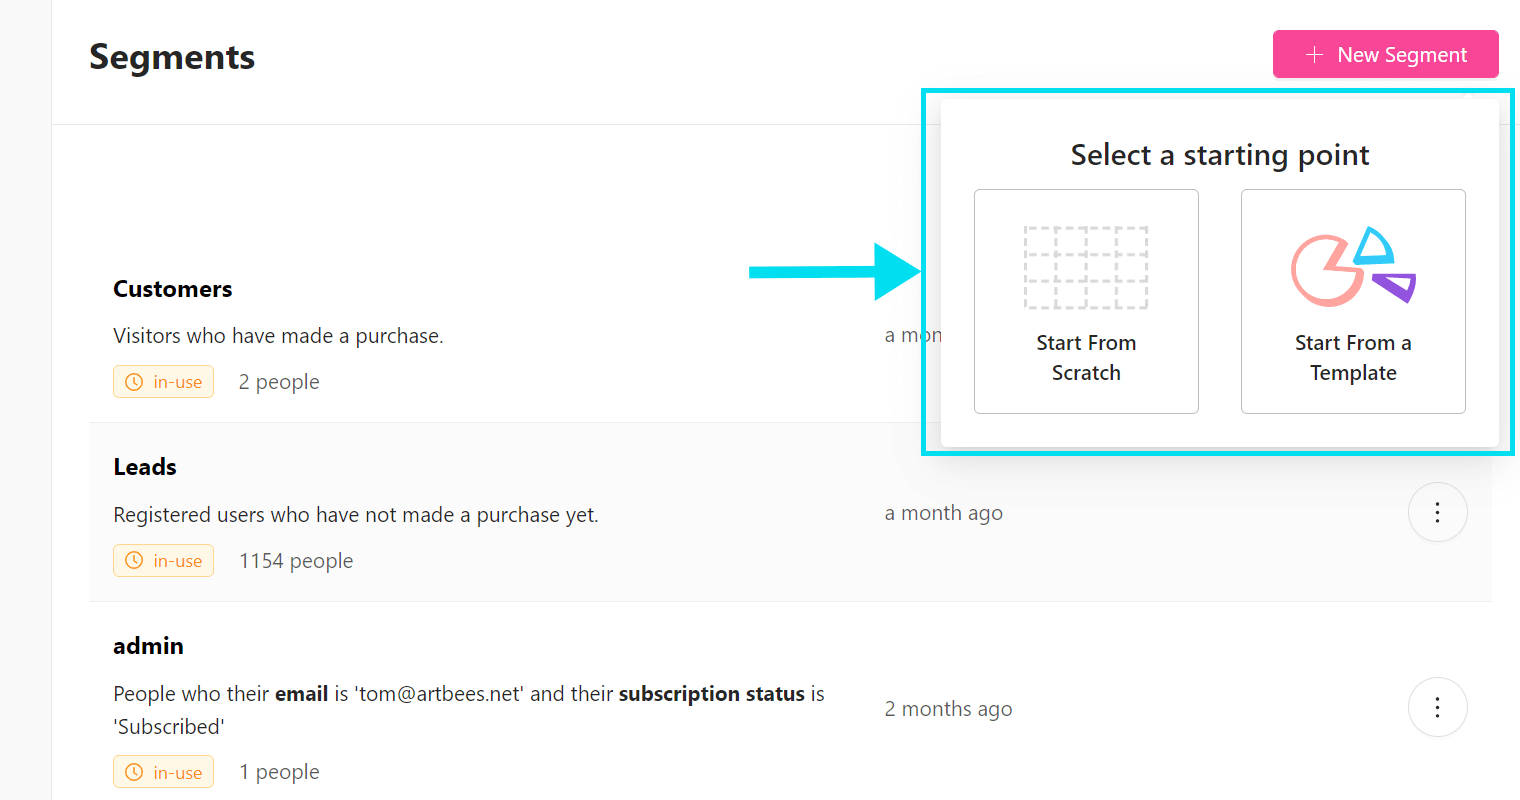 Growmatik people - select a starting point